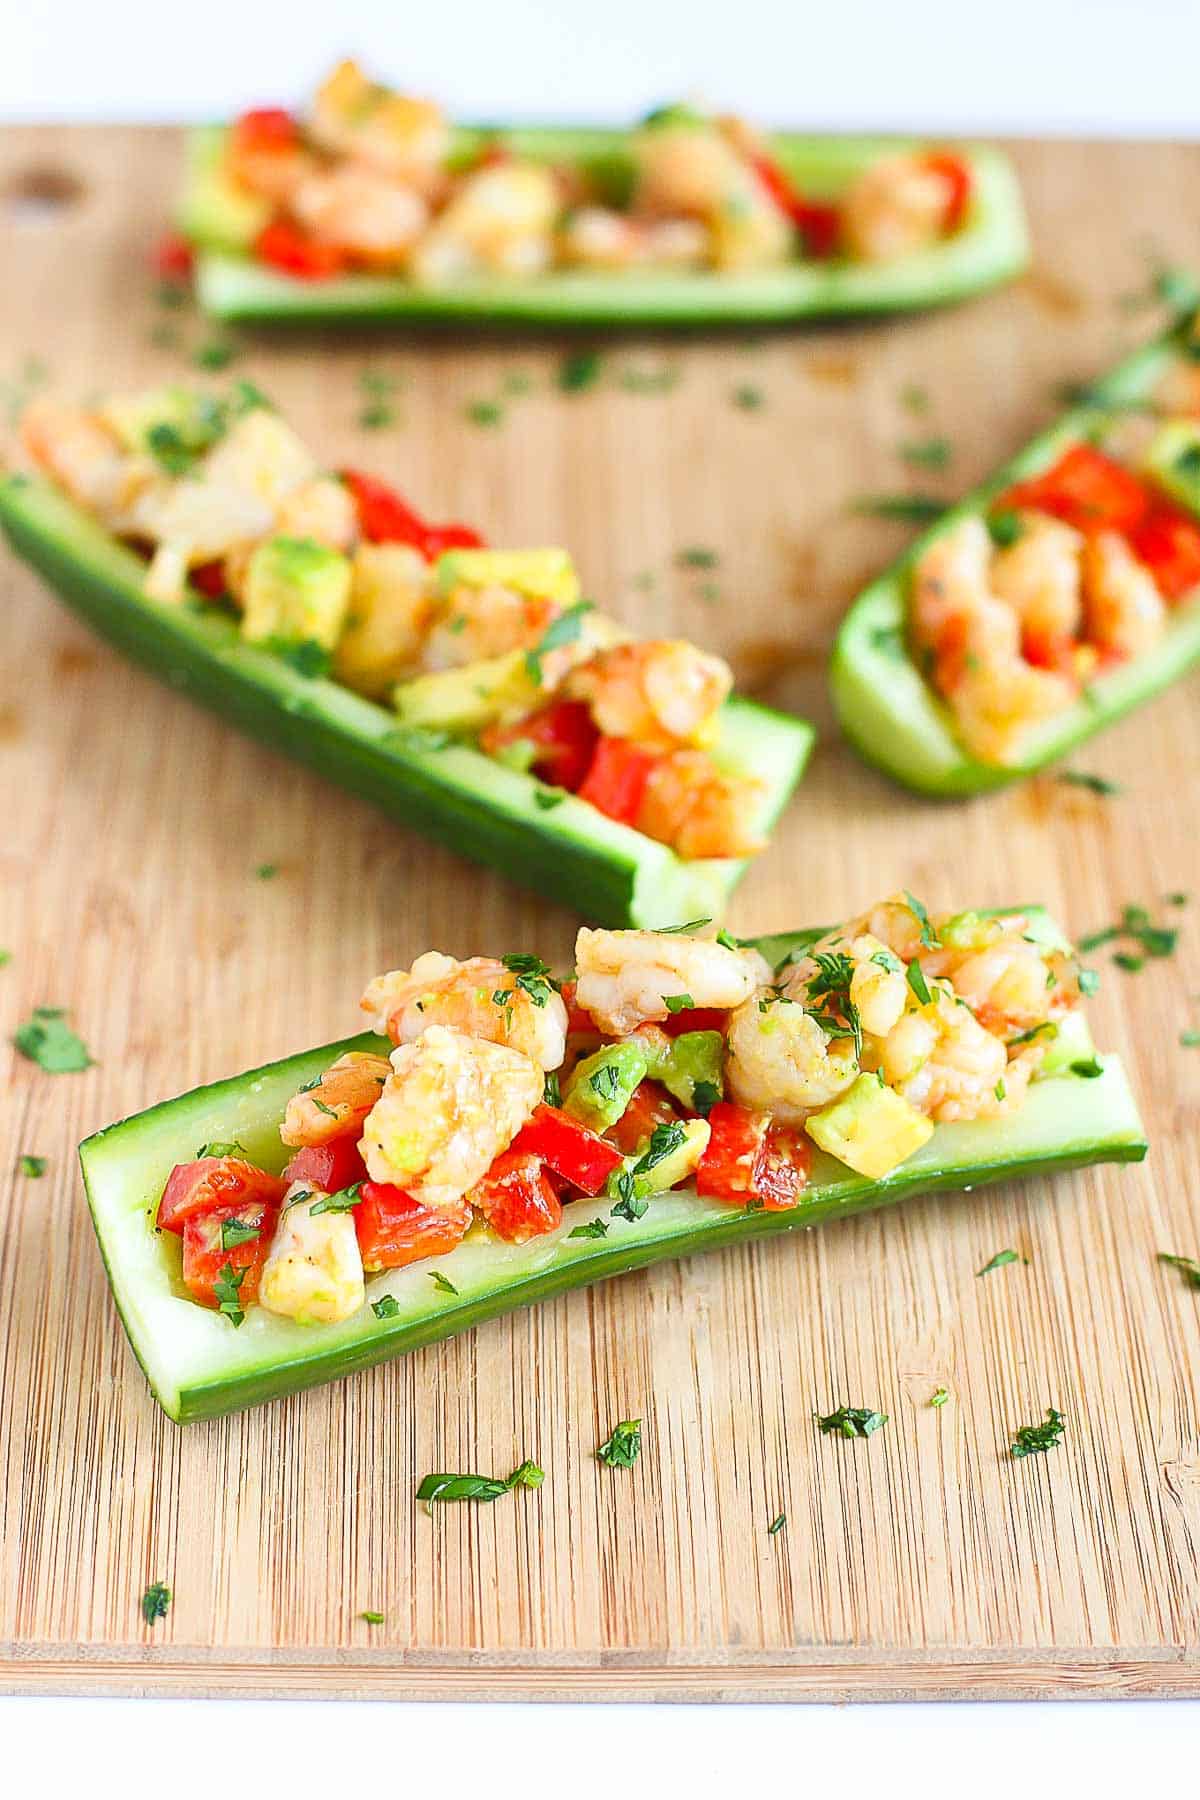 These shrimp and avocado stuffed cucumber boats have summertime written all over them! Serve them as a healthy lunch or pair them with a whole grain salad for dinner. 215 calories and 4 Weight Watchers SP | Recipes | Light | Vinaigrette